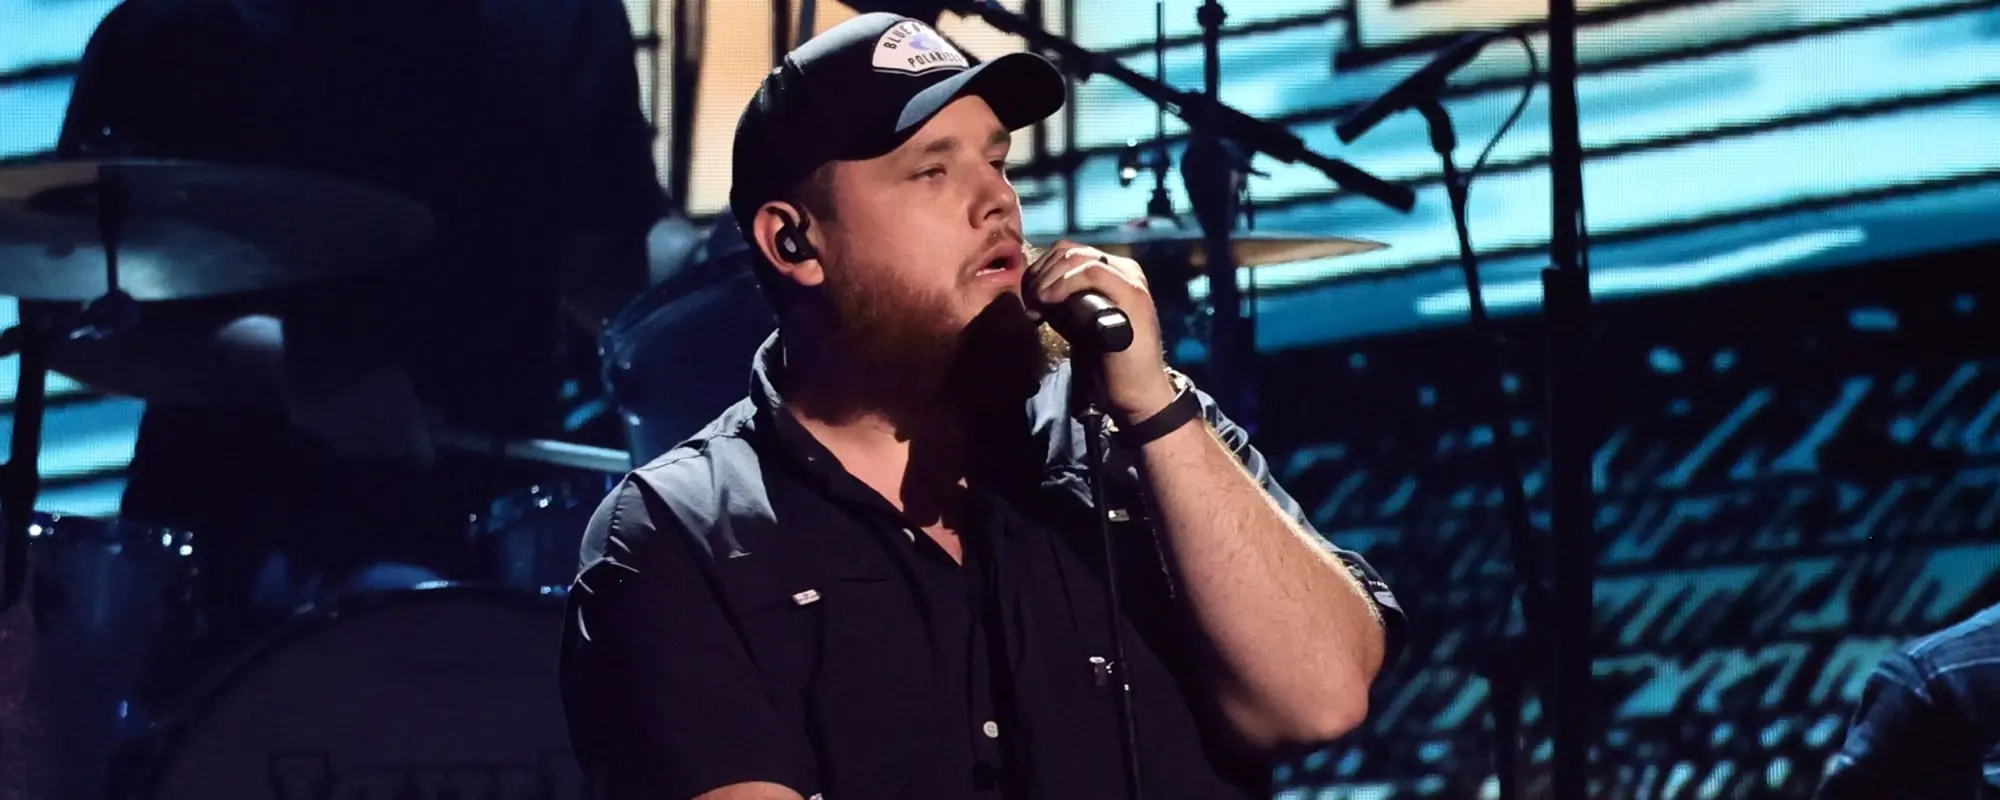 Luke Combs Shares Snippet of New Song “Plant a Seed,” Tells His Fans “Sorry for All the Dad Songs”